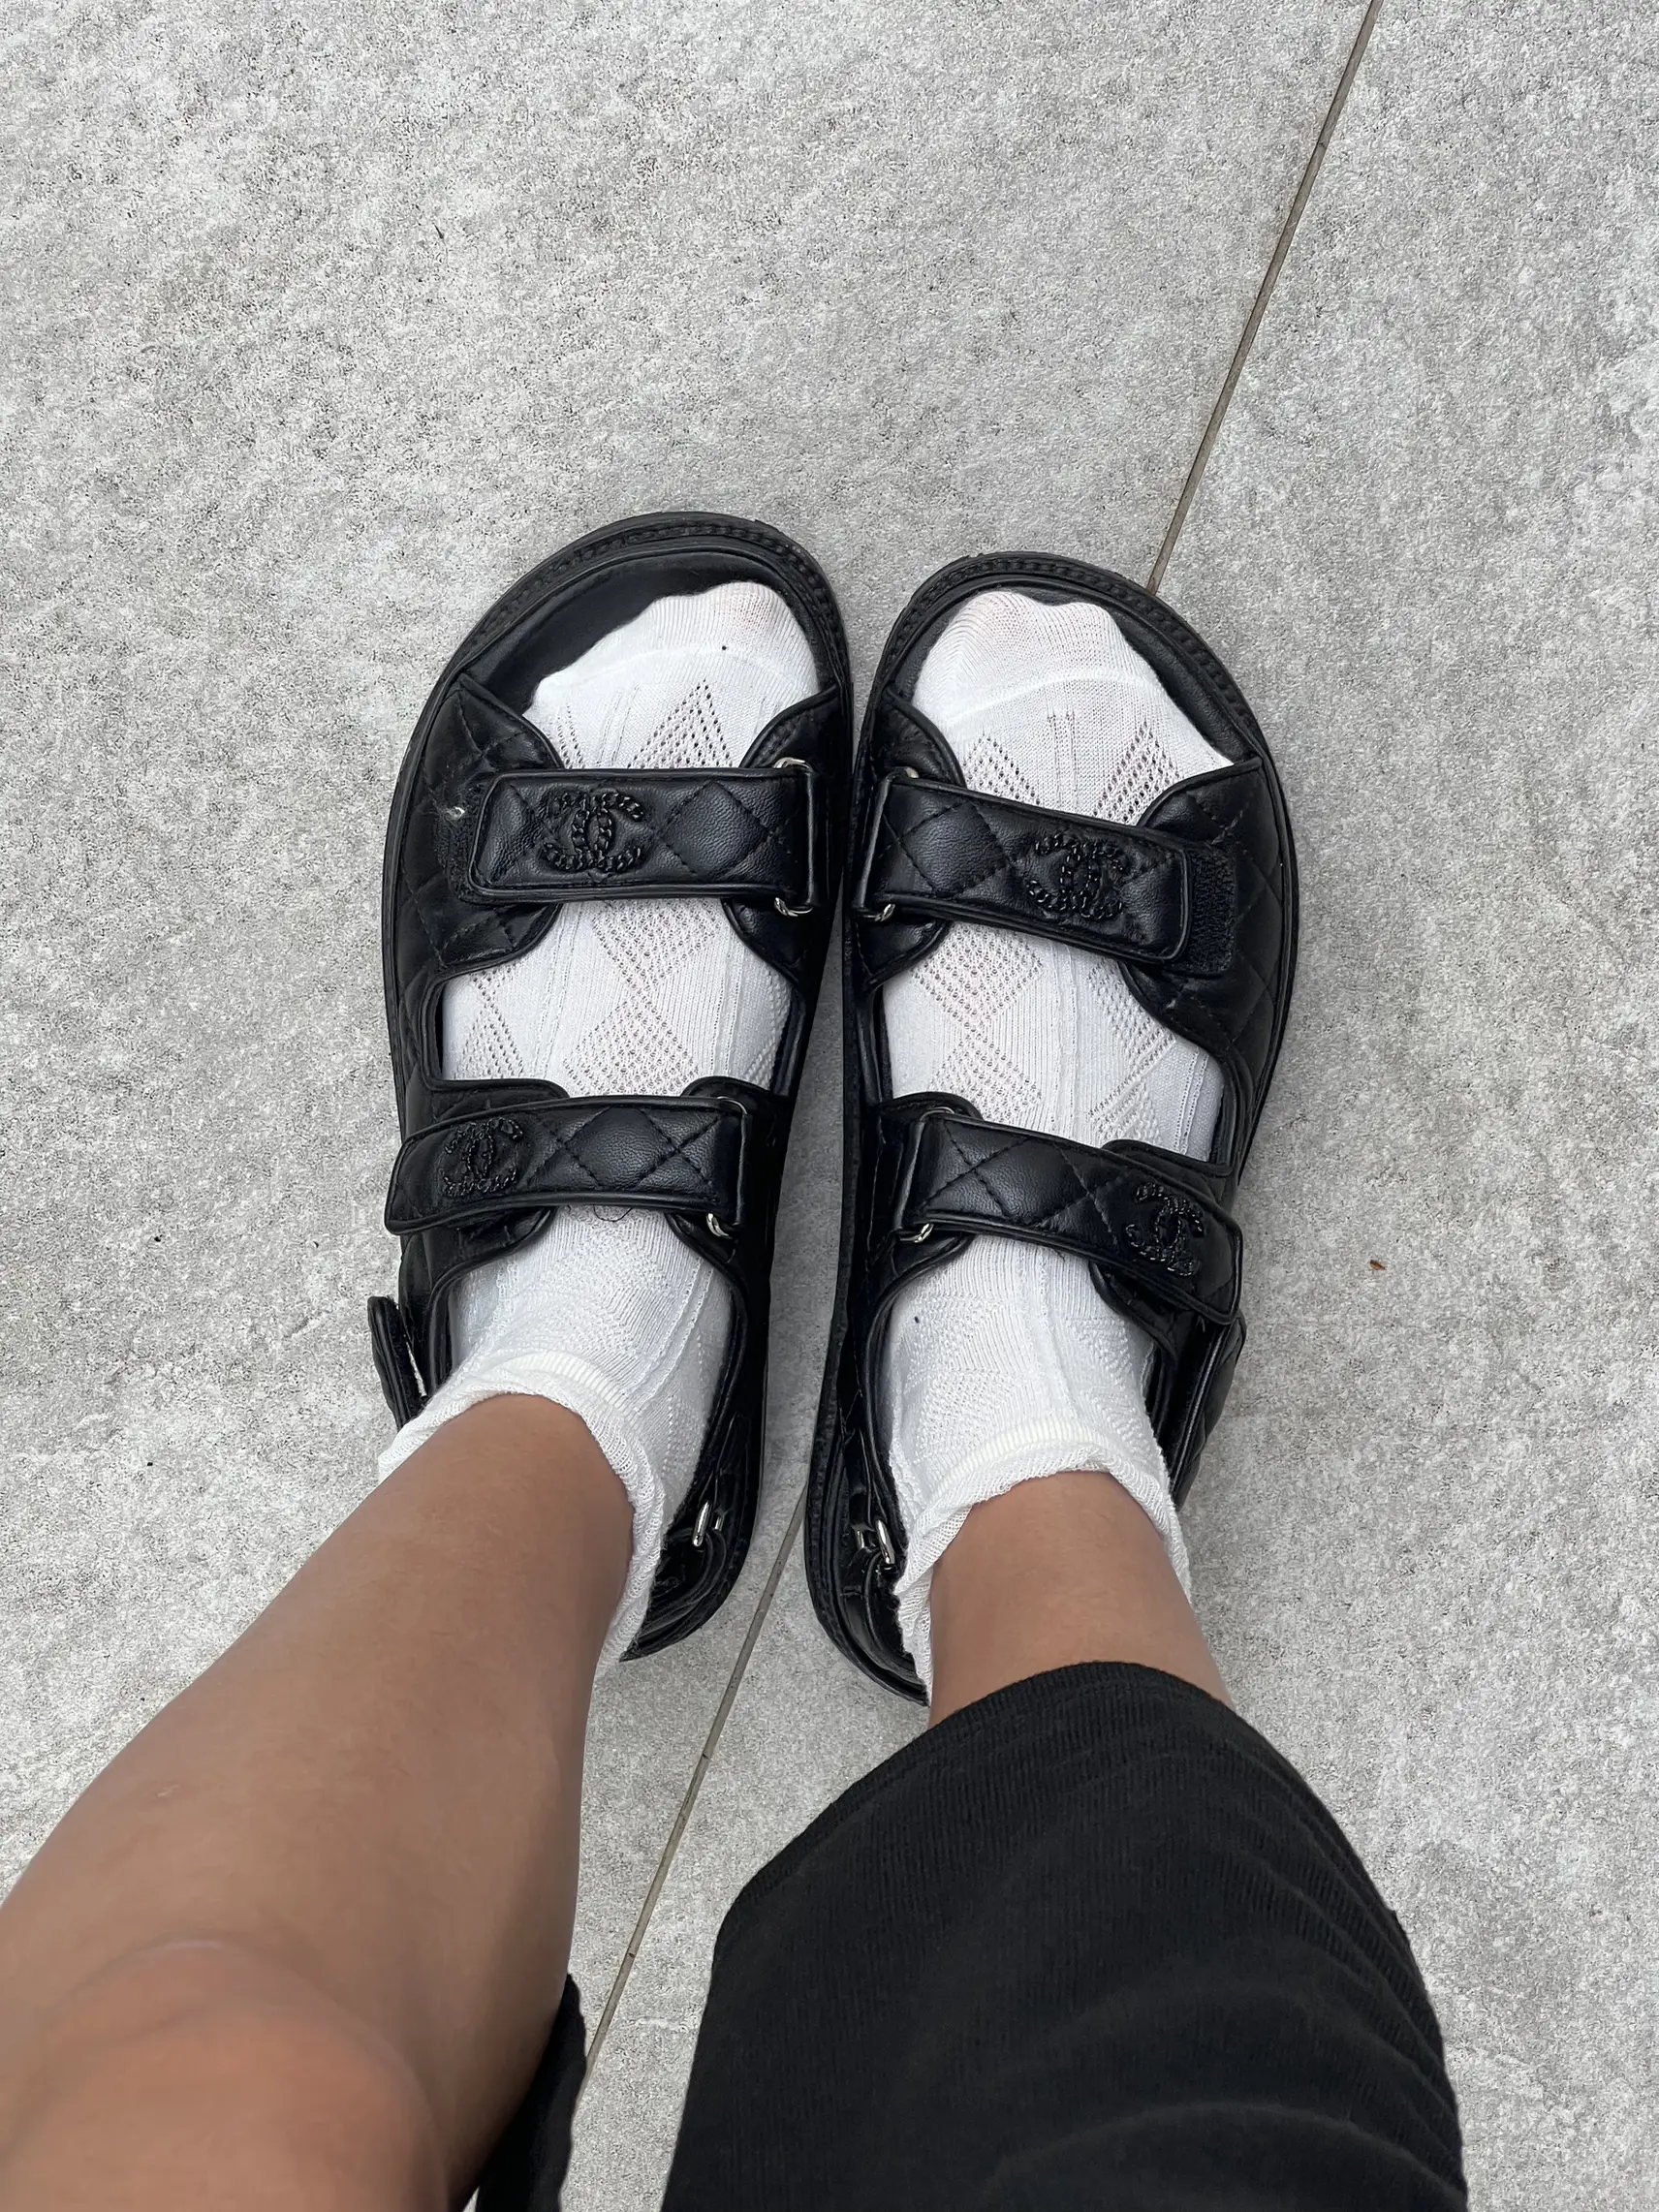 Socks with Sandals?!?! 🧦's images(1)